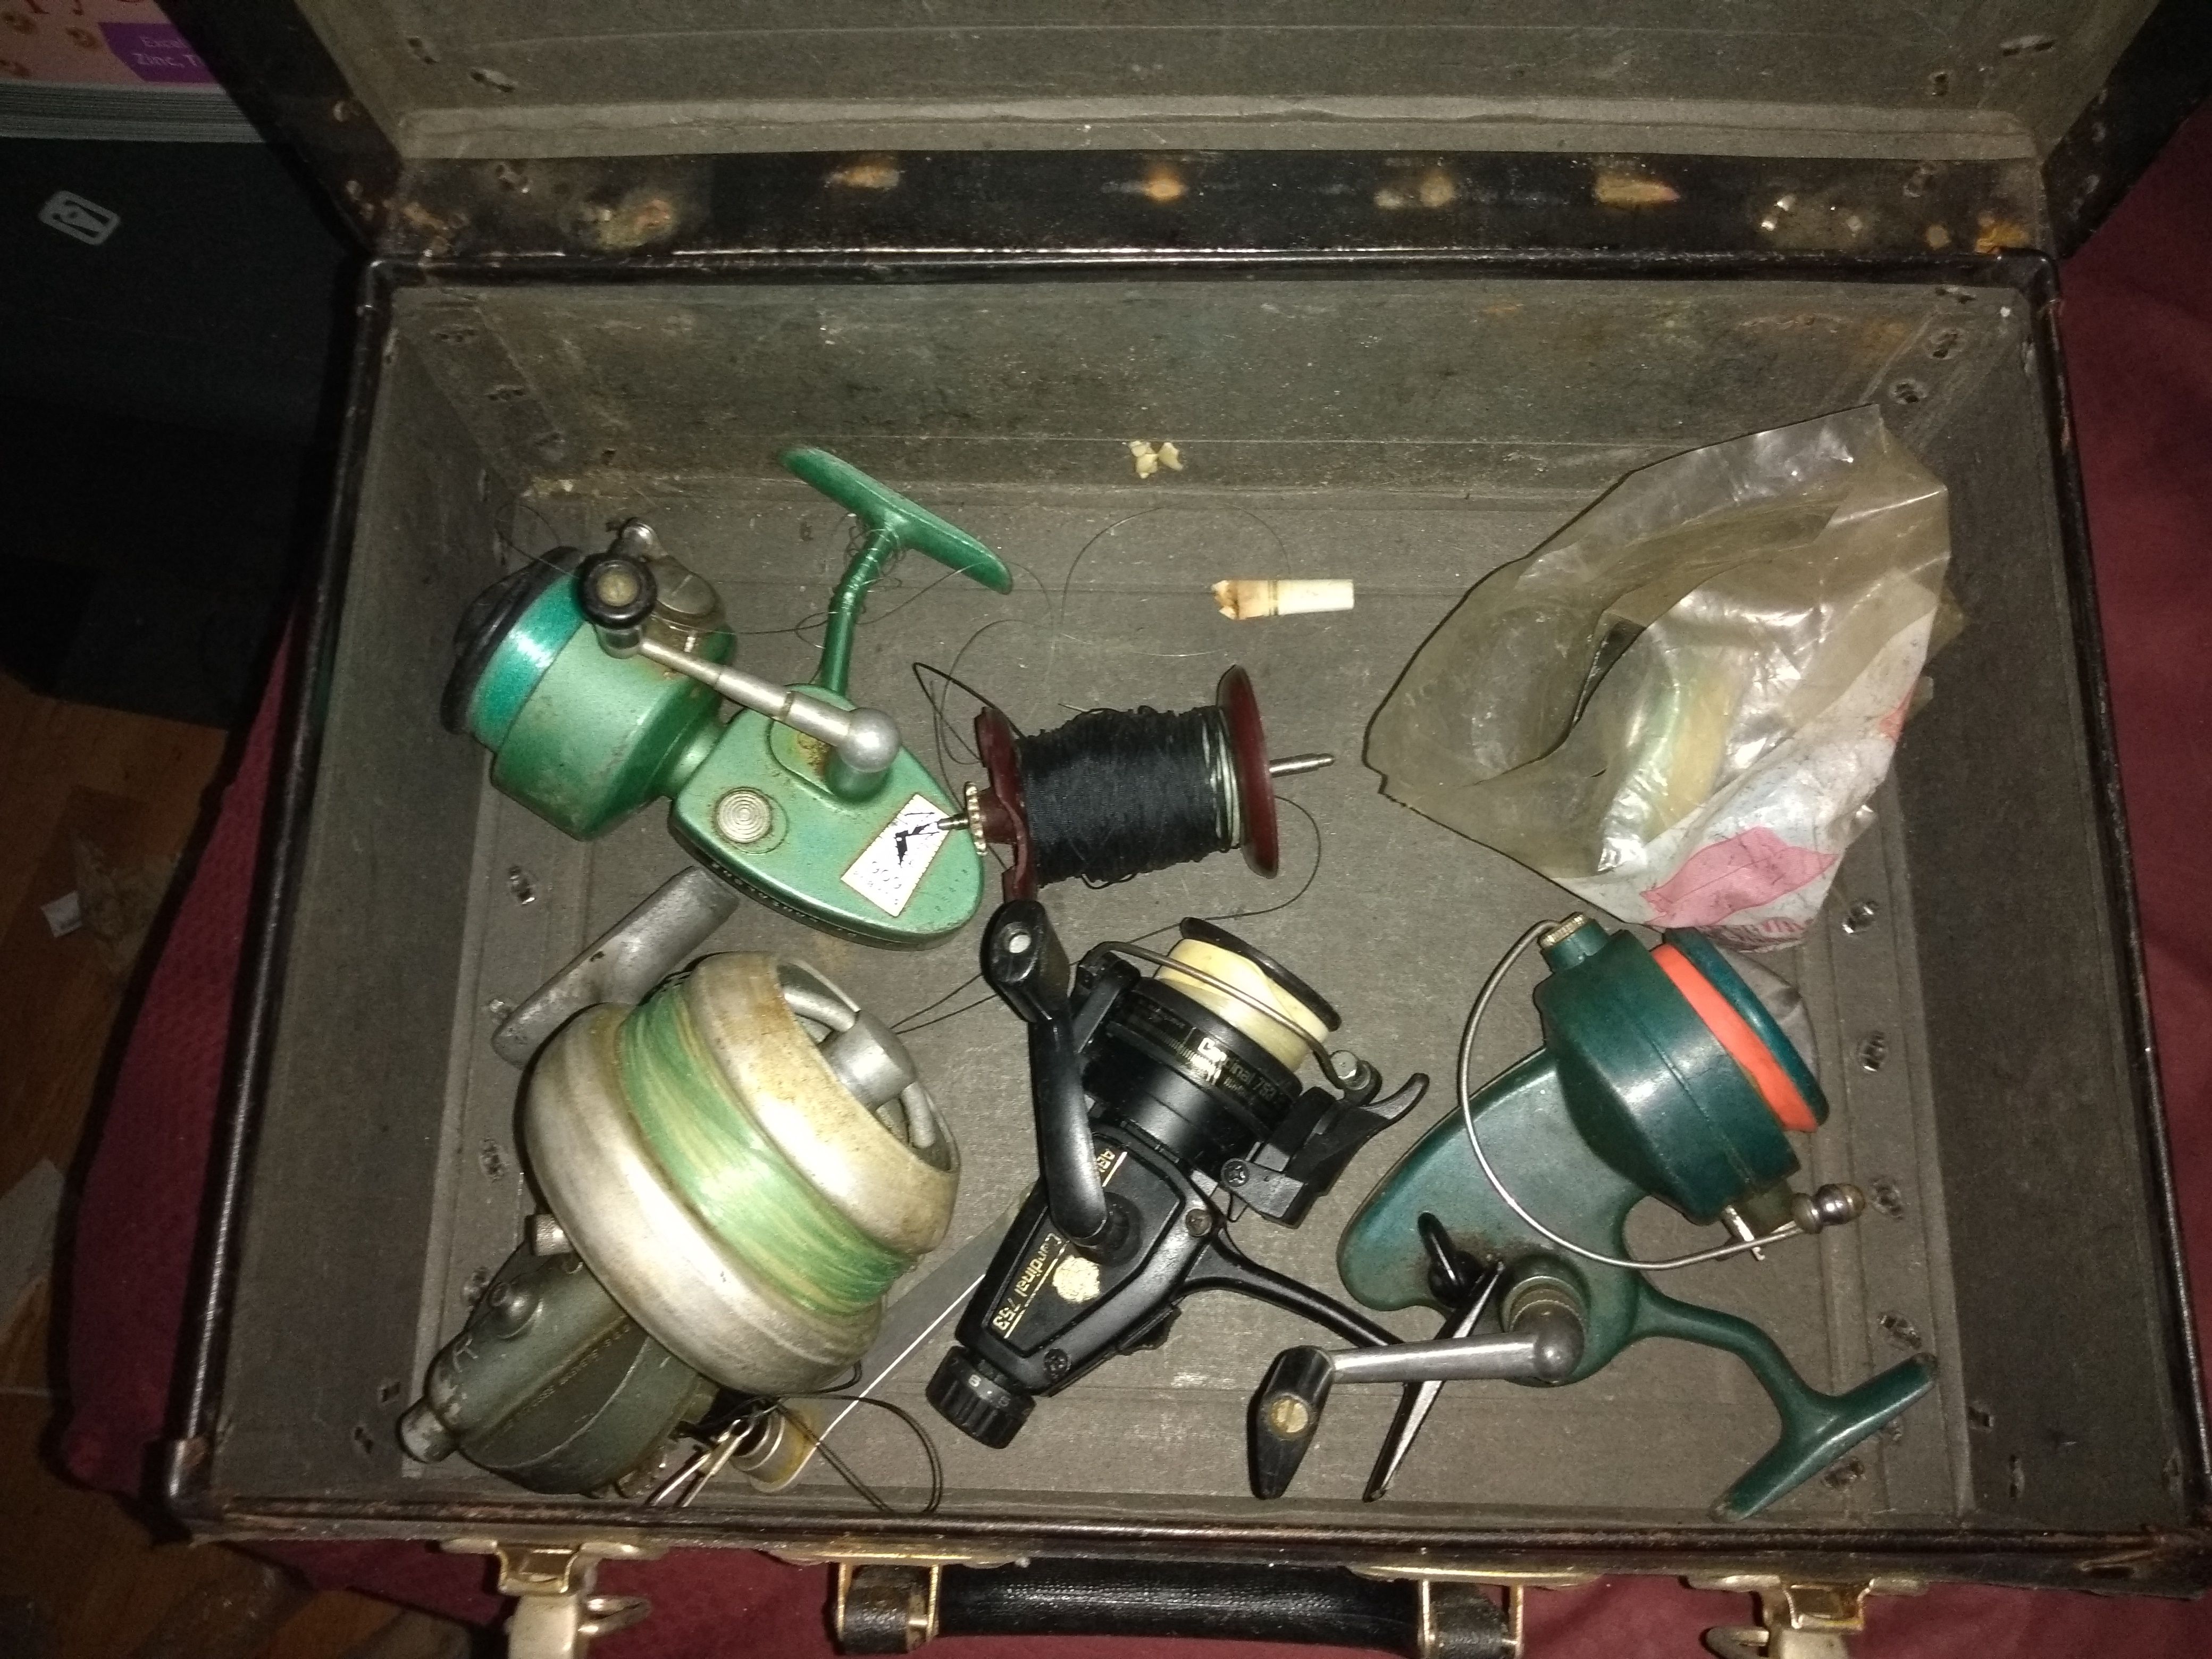 Collection of vintage fishing reels